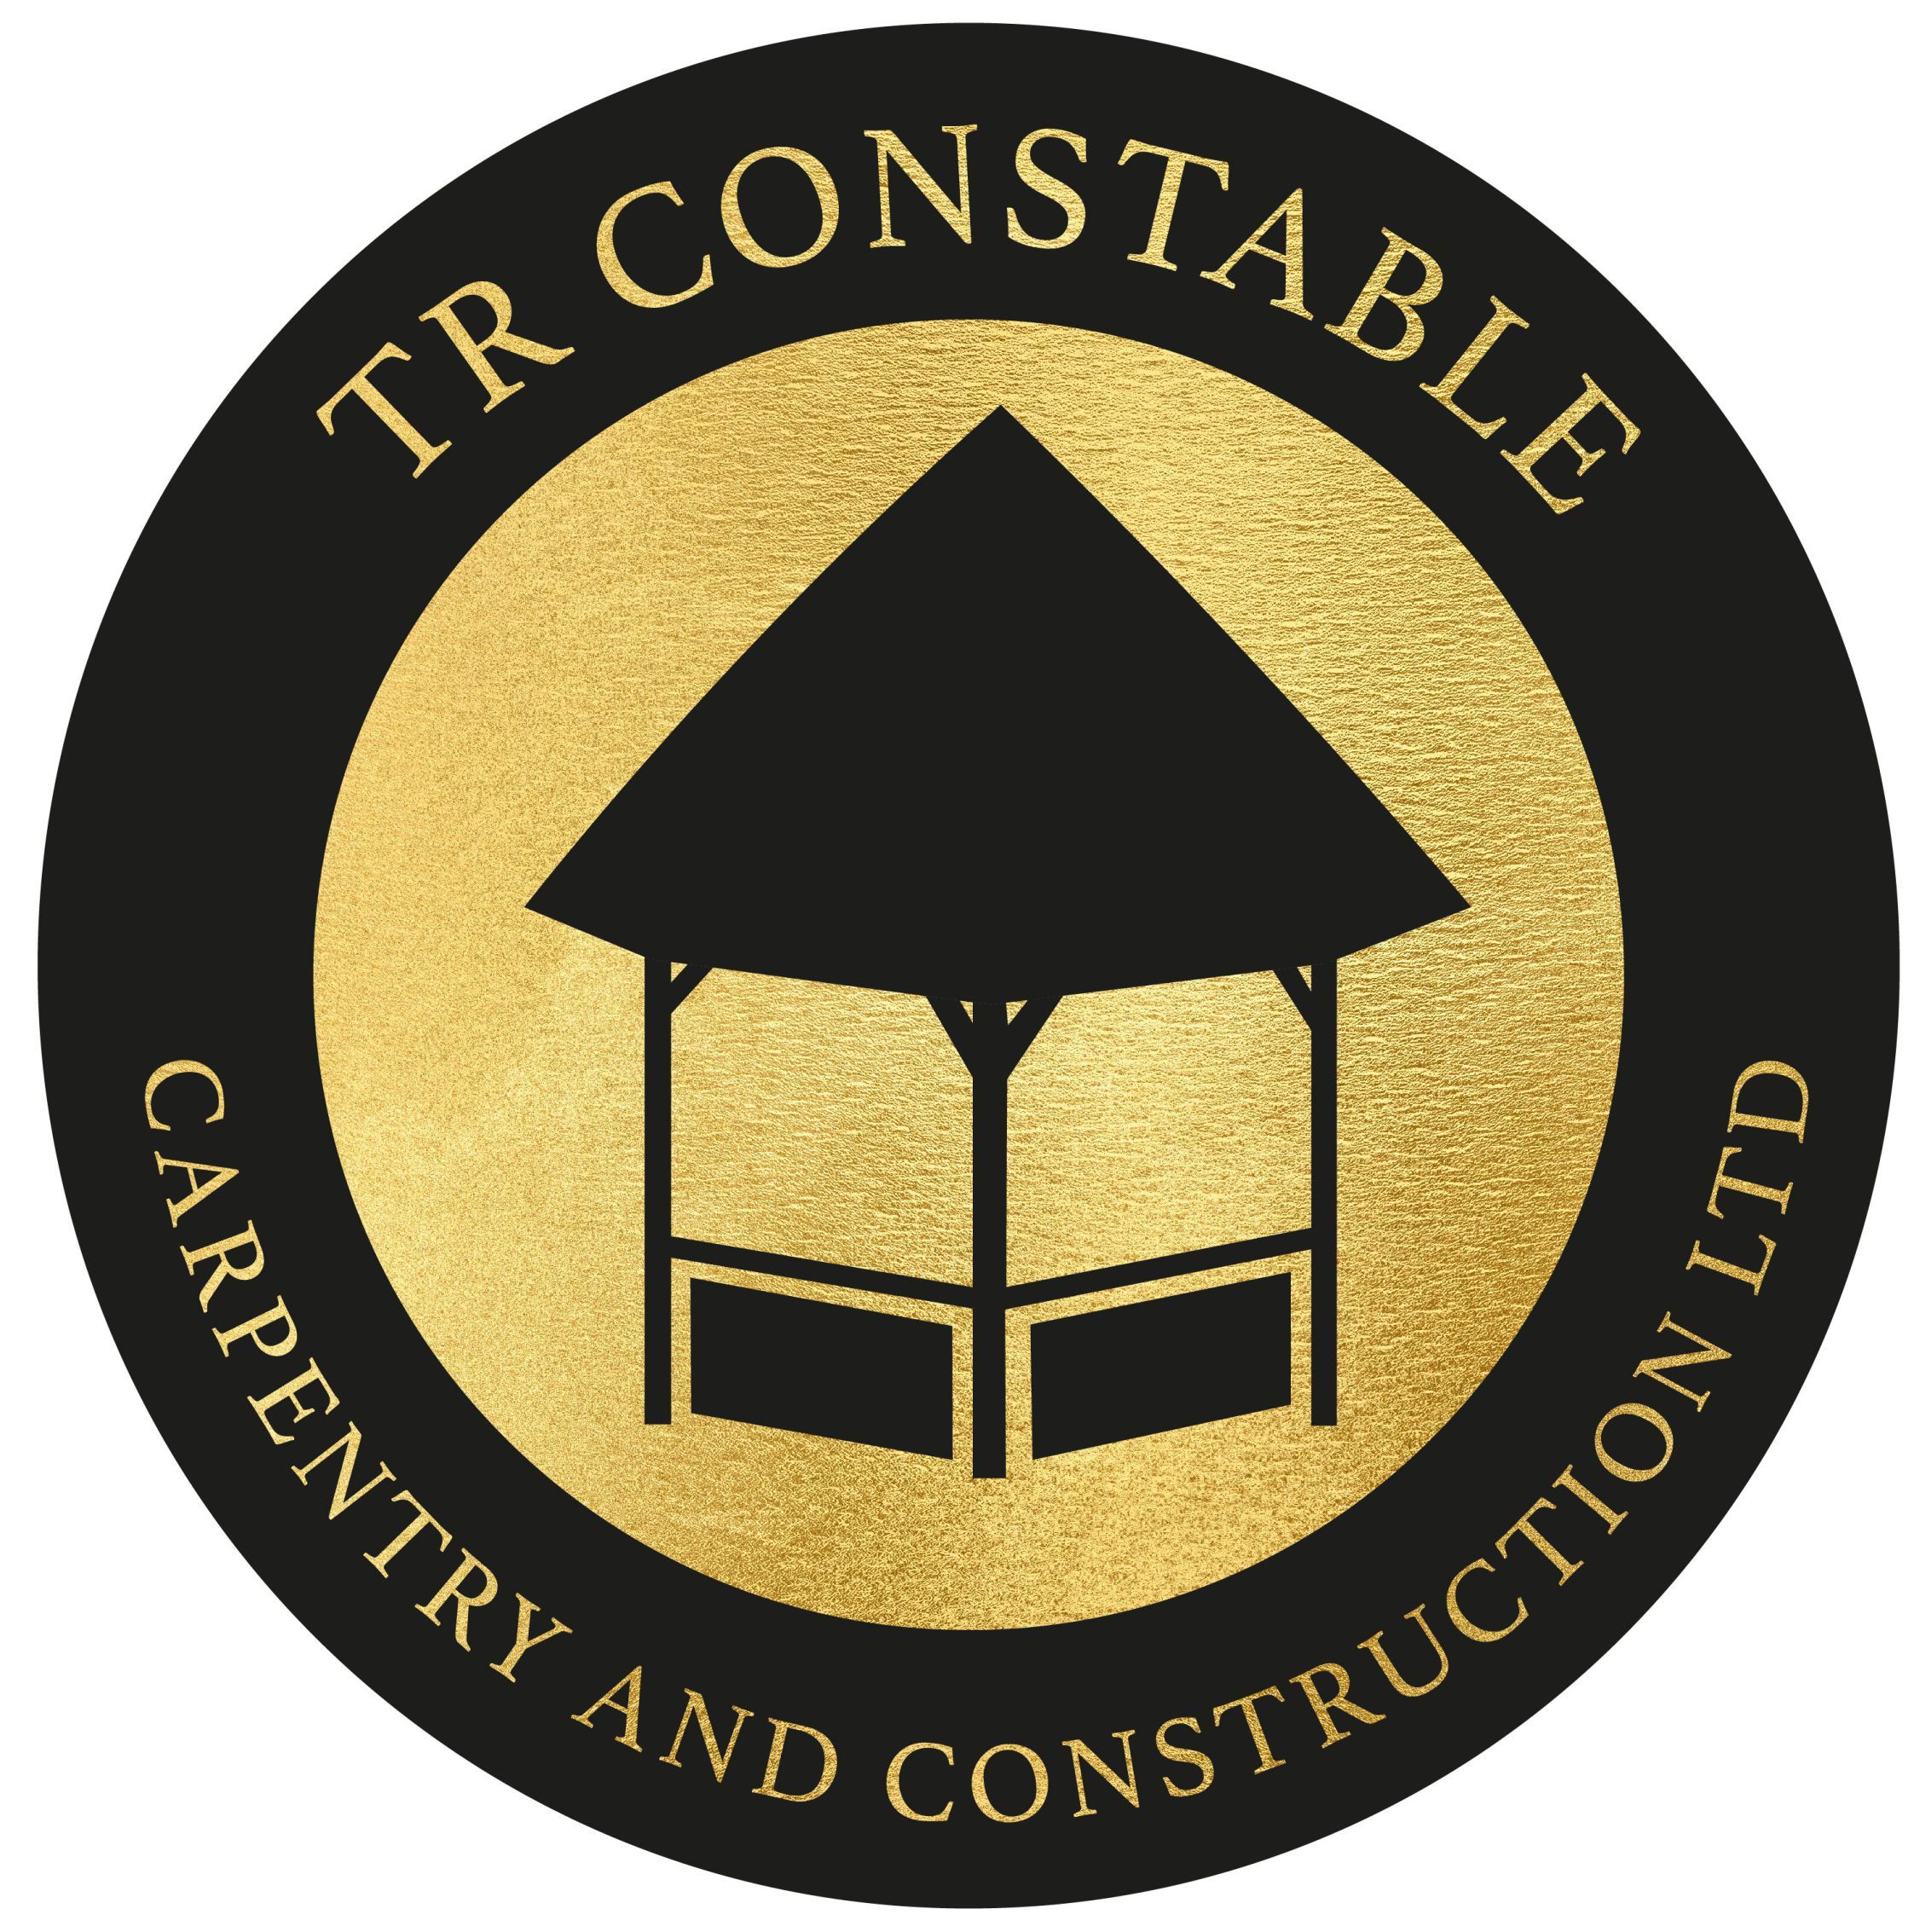 Tom Constable- T R Constable Carpentry and Construction